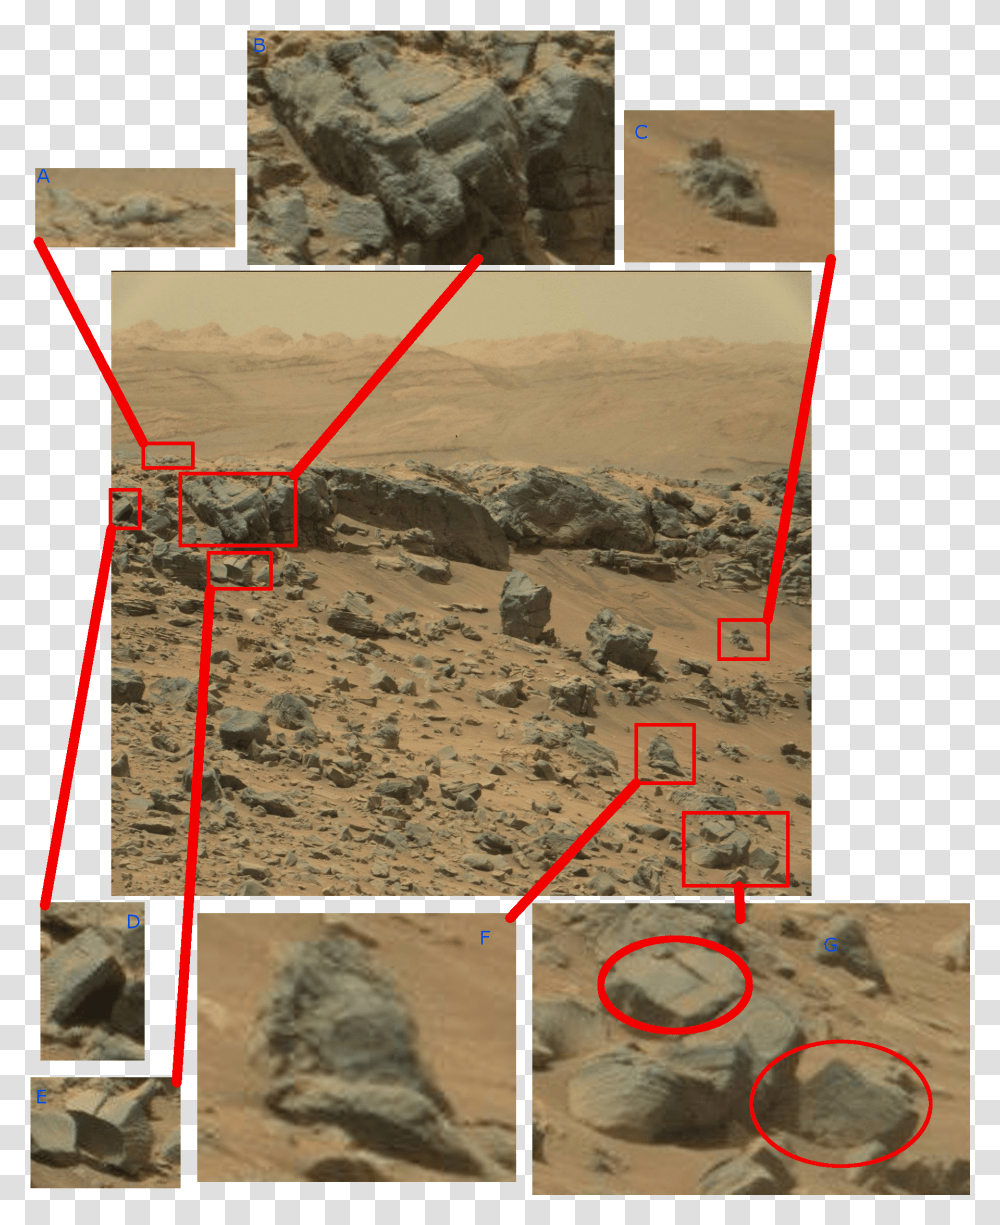 Sol 710 Mars Rover Artifacts Harry Transparent Png